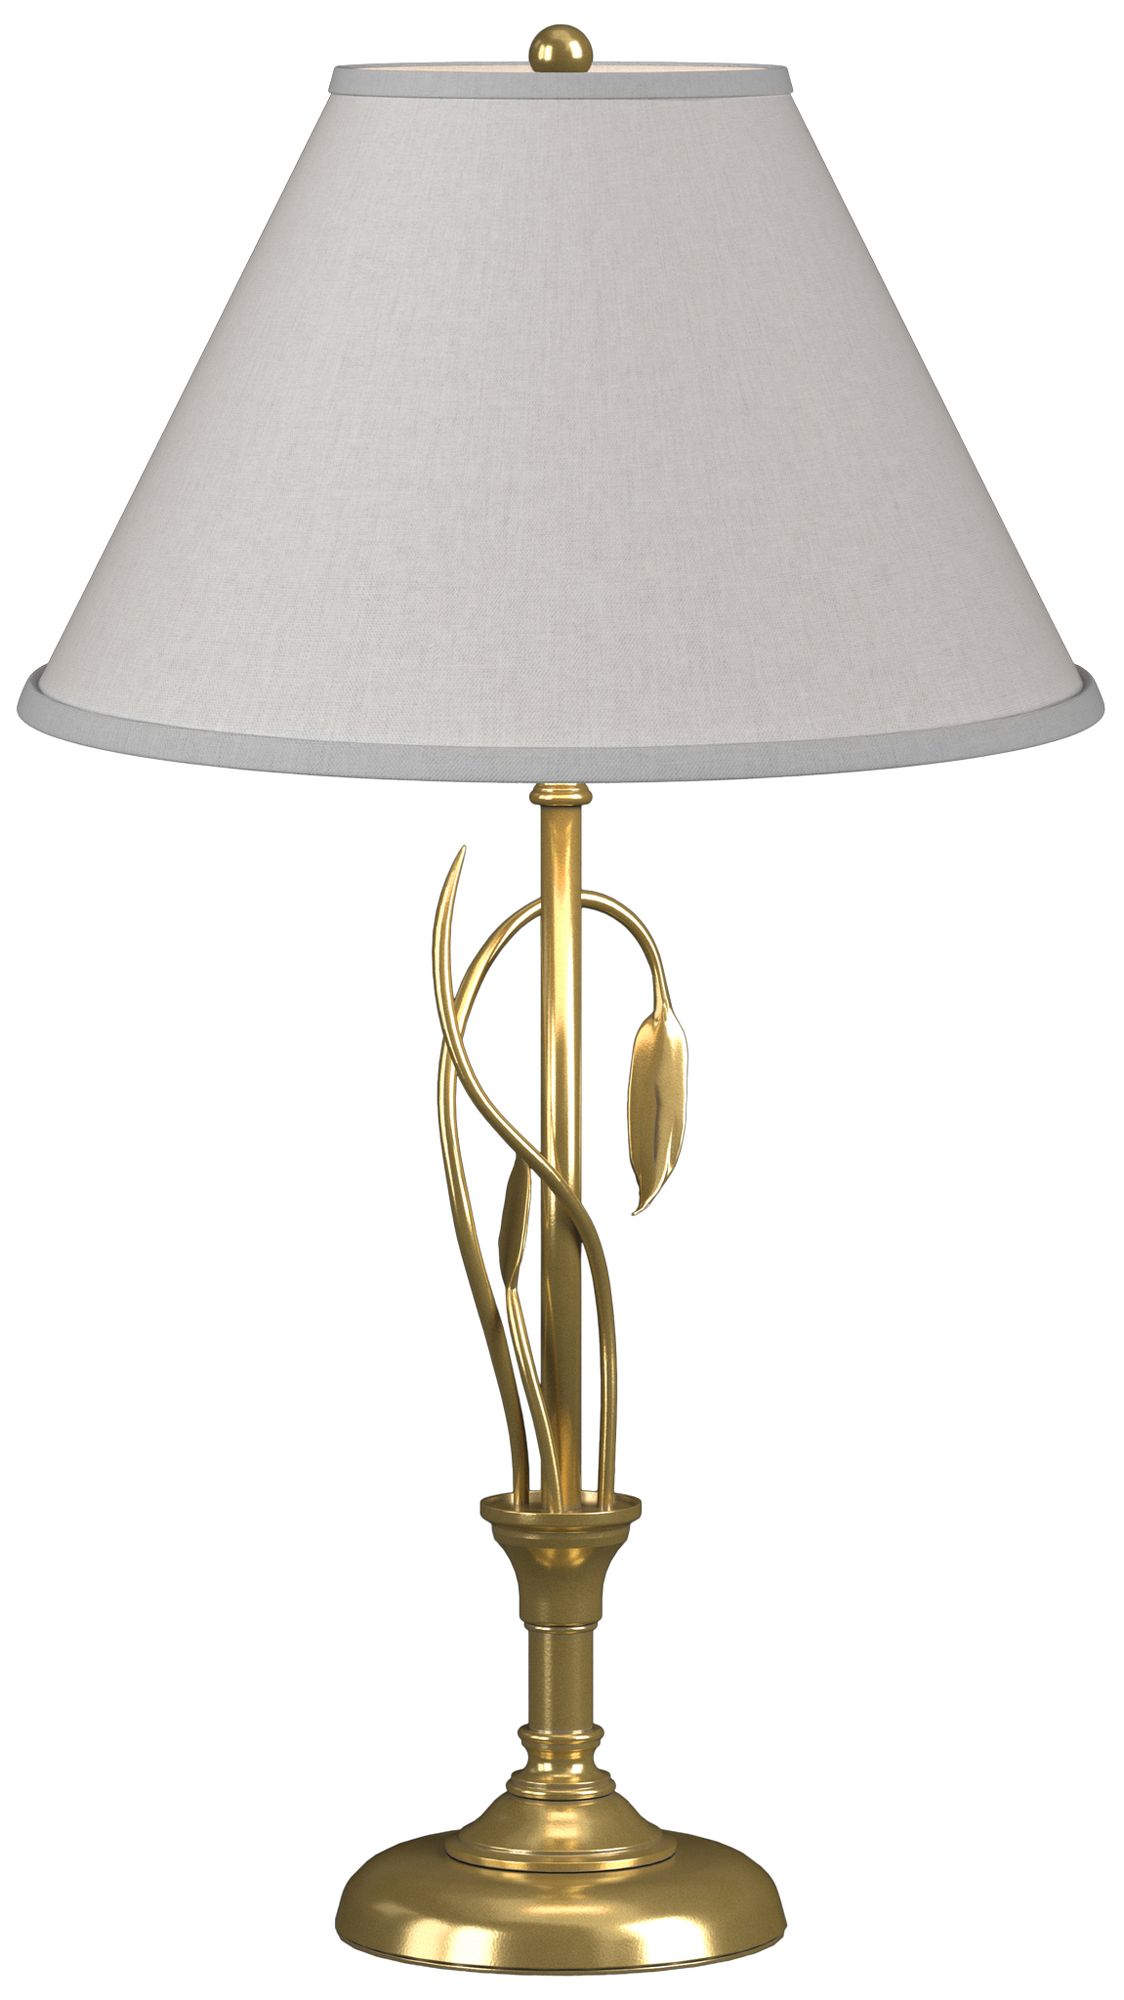 Forged Leaves and Vase 26.4"H Modern Brass Table Lamp w/ Light Grey Sh